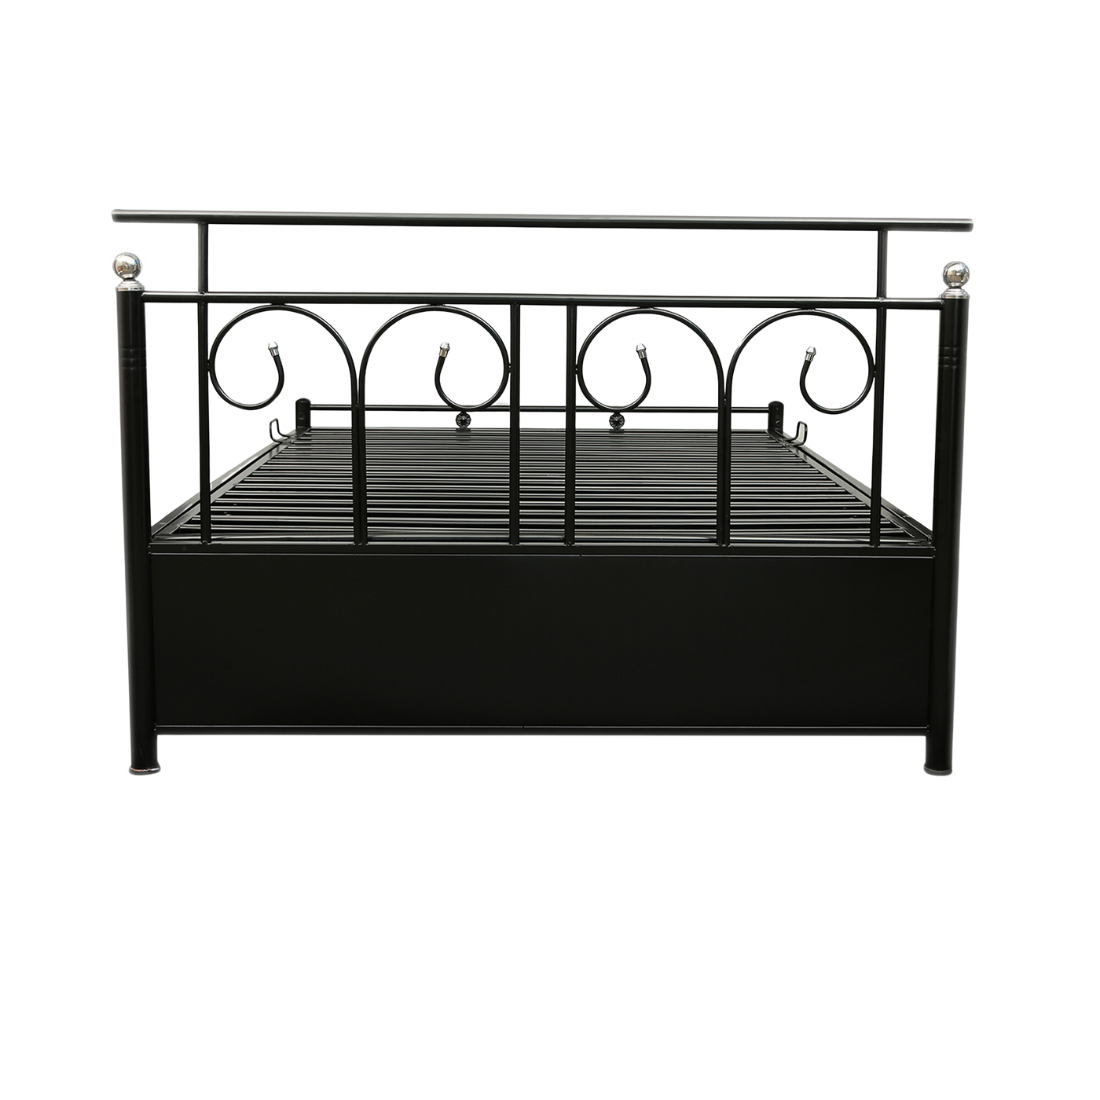 Colin Hydraulic Storage Double Metal Bed (Color - Black) with Designer Headrest